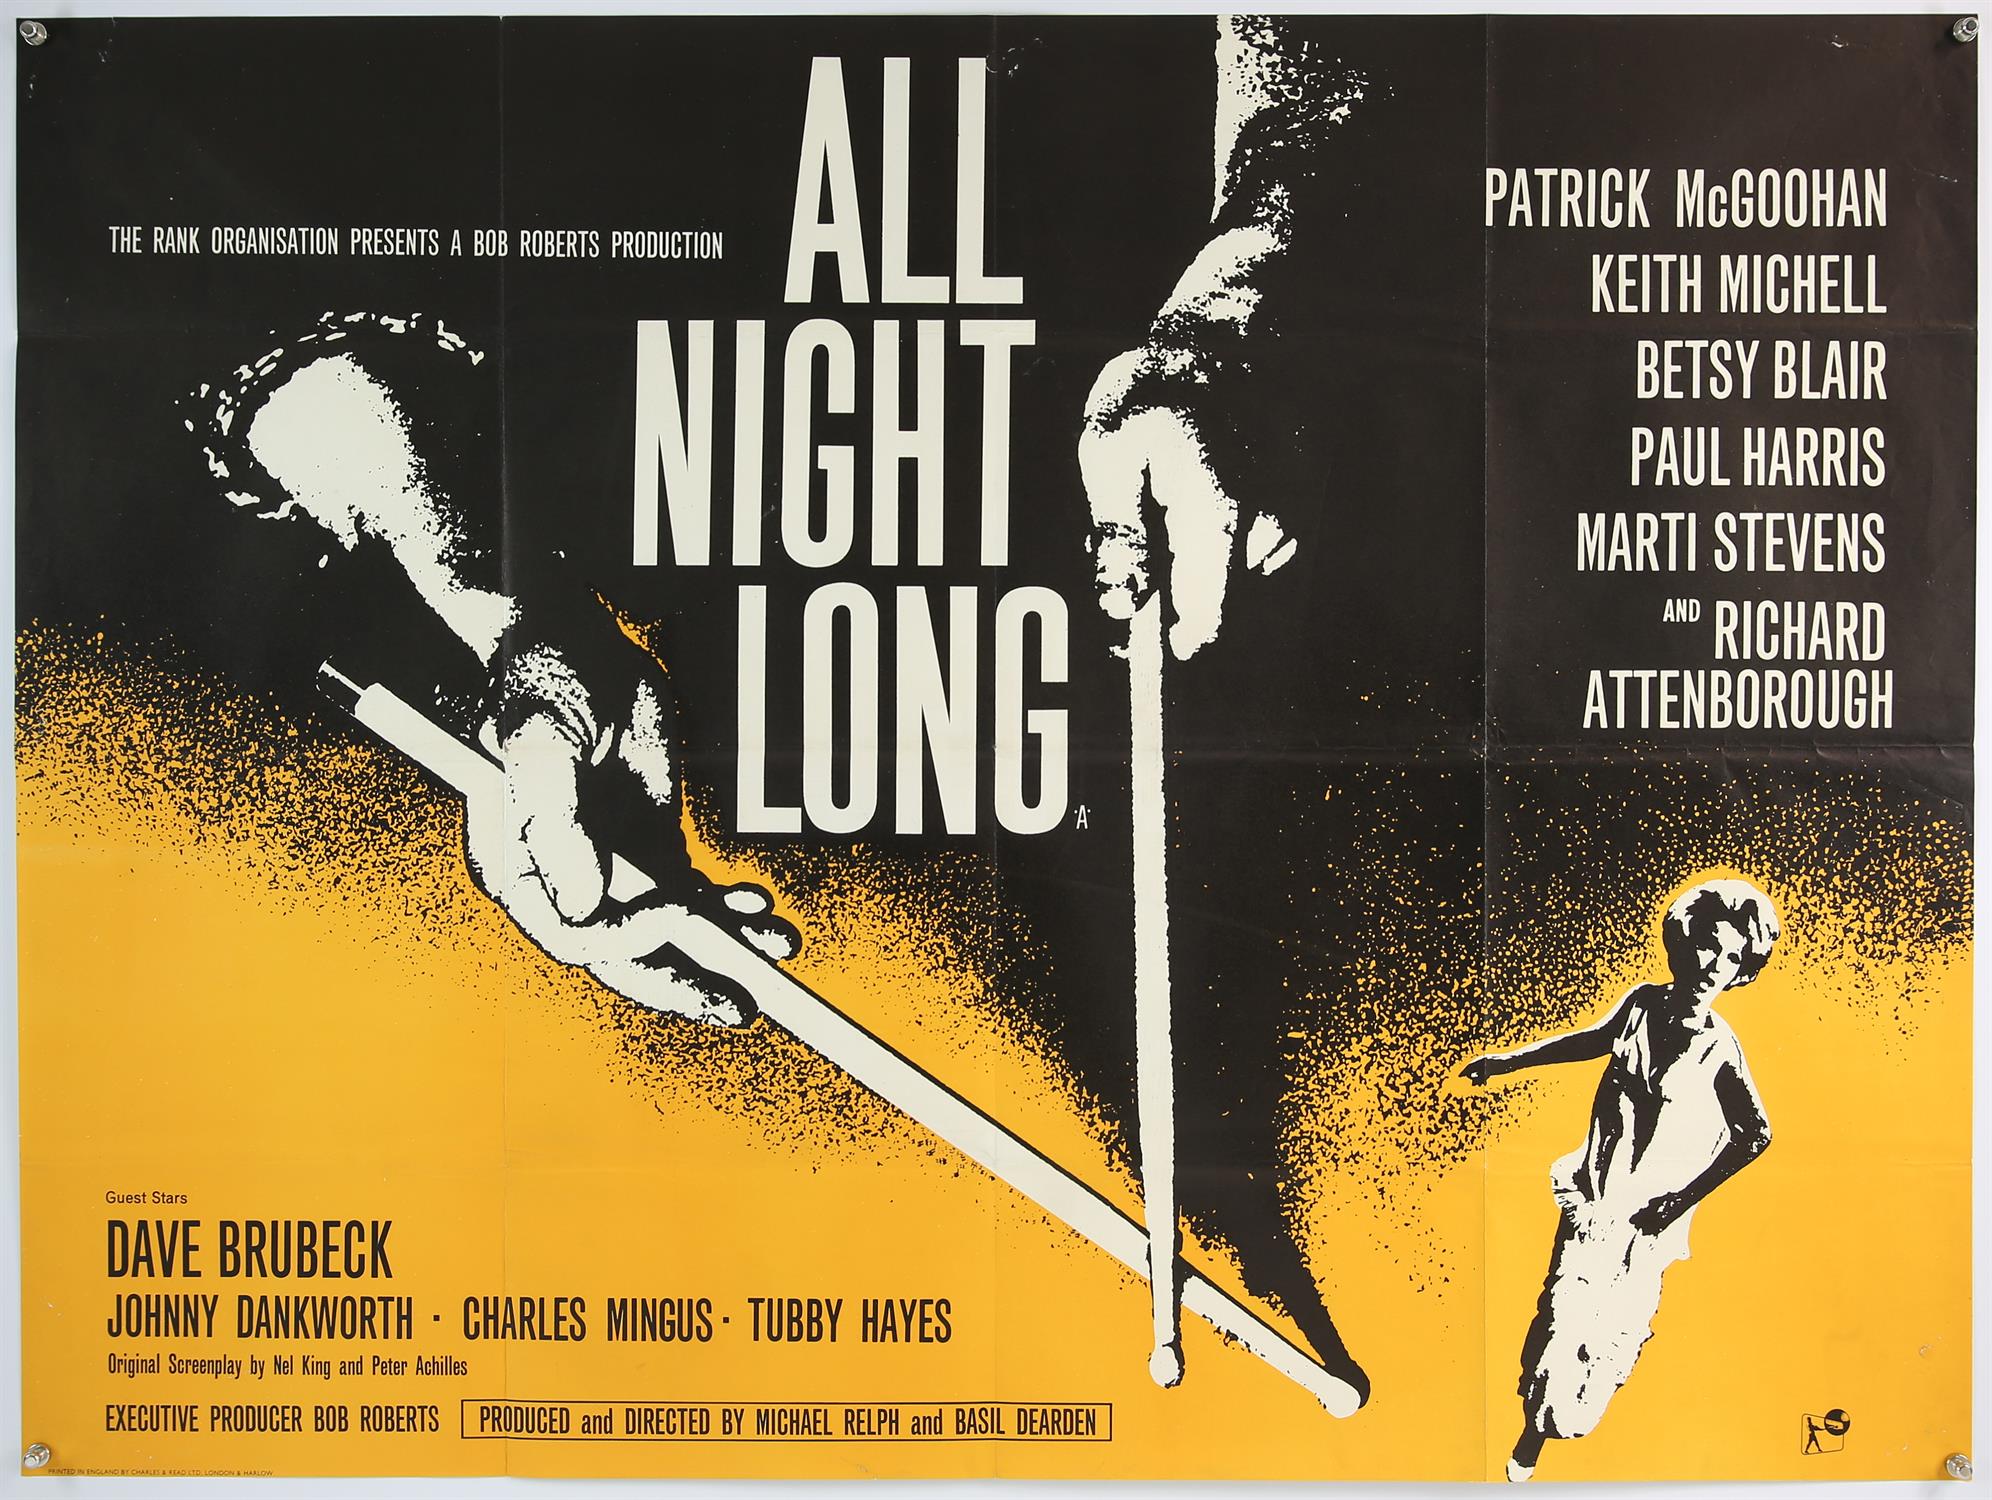 All Night Long (1962) British Quad film poster for the British noir set in the London Jazz scene